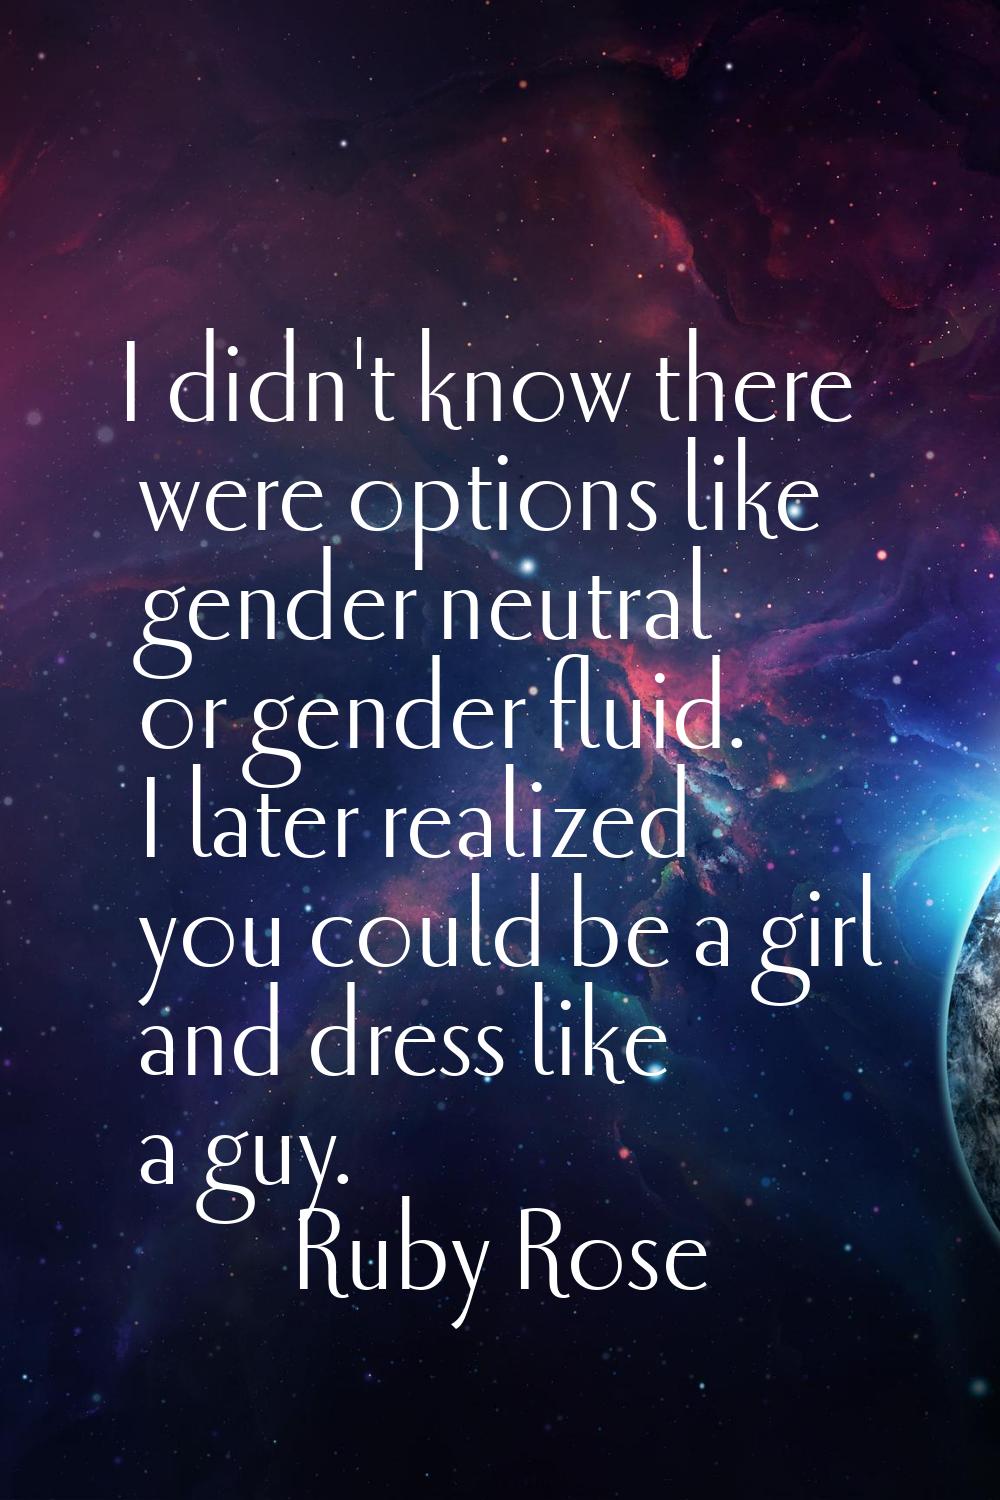 I didn't know there were options like gender neutral or gender fluid. I later realized you could be